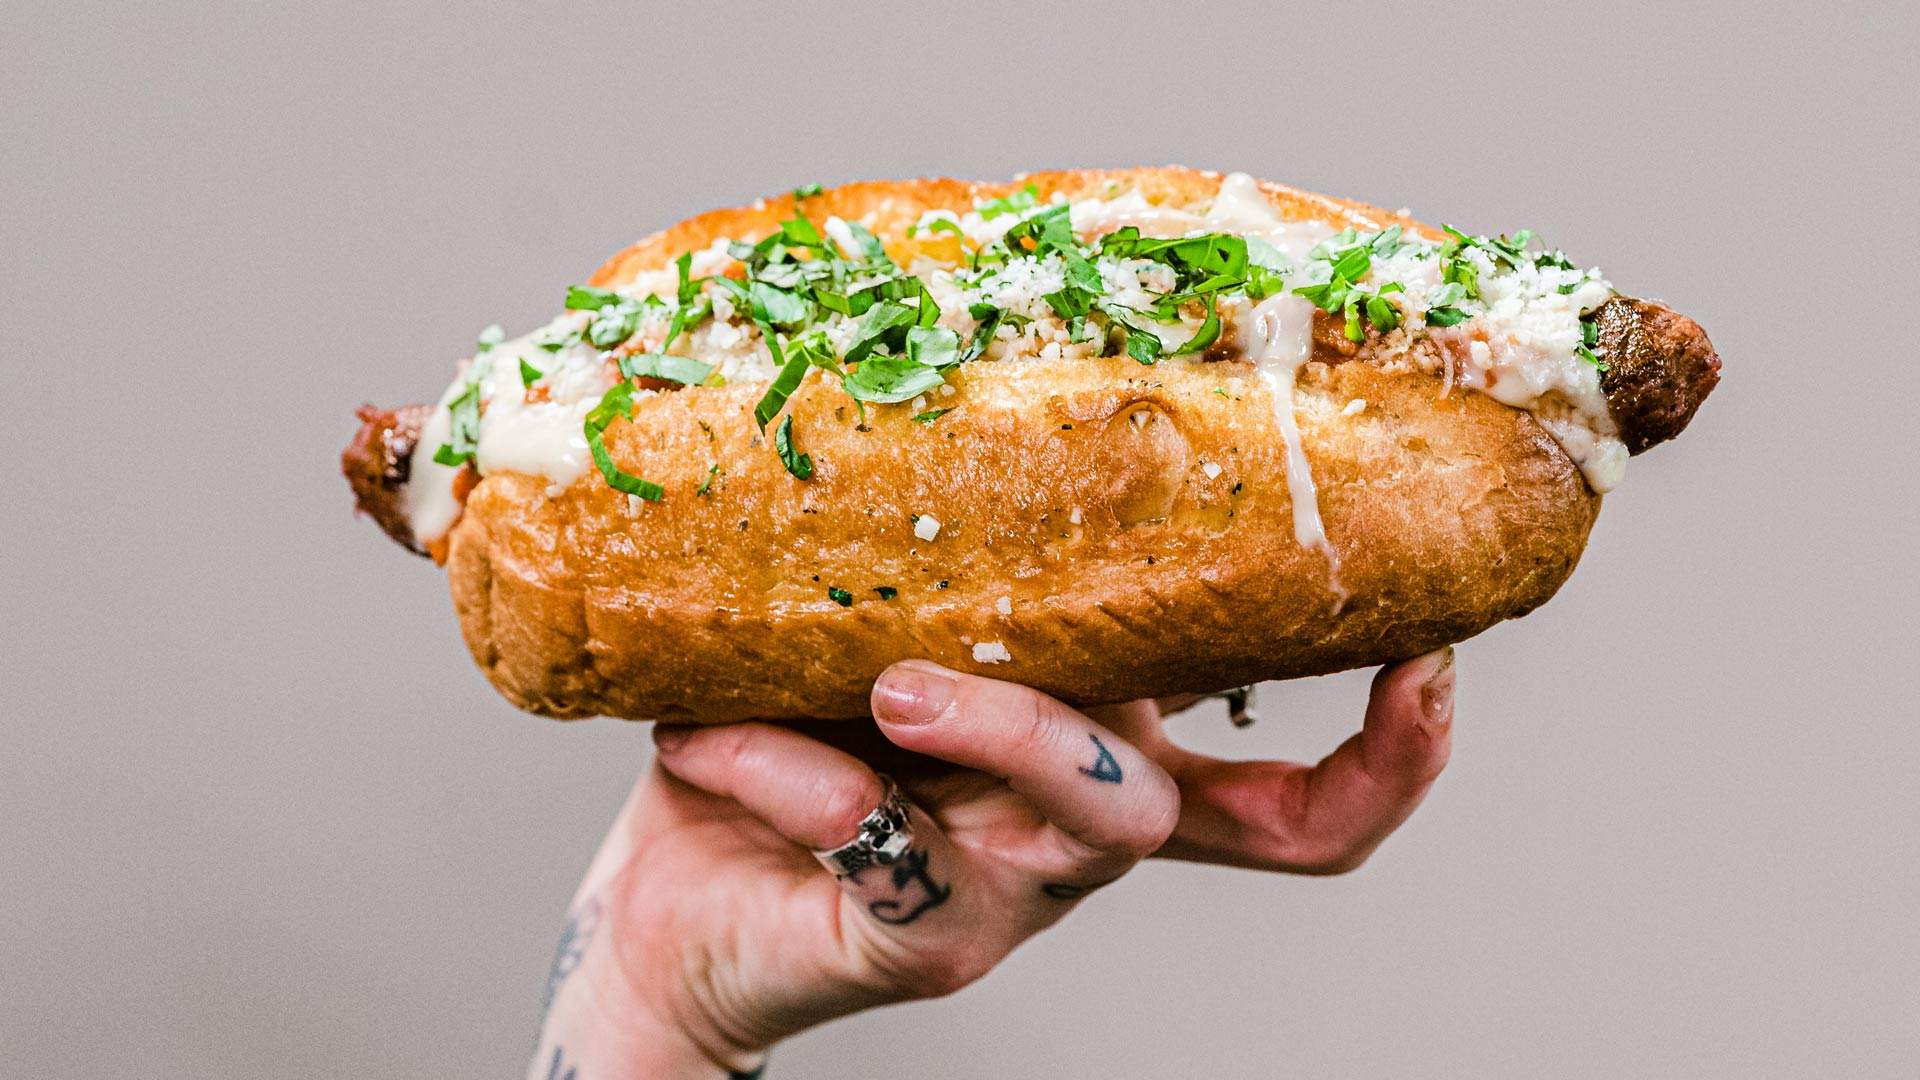 You Can Score Chef Shannon Martinez's Vegan Hot Dogs for Free Today